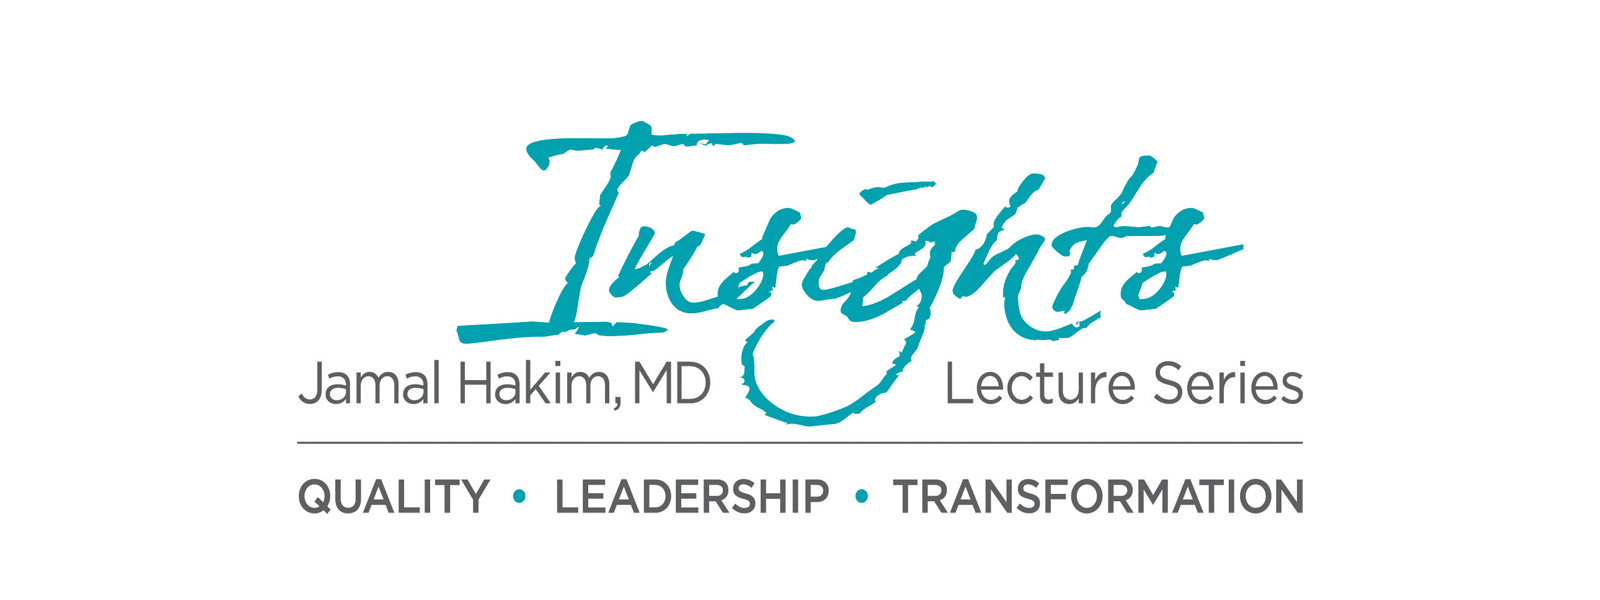 Jamal Hakim, MD Insights Lecture Series 